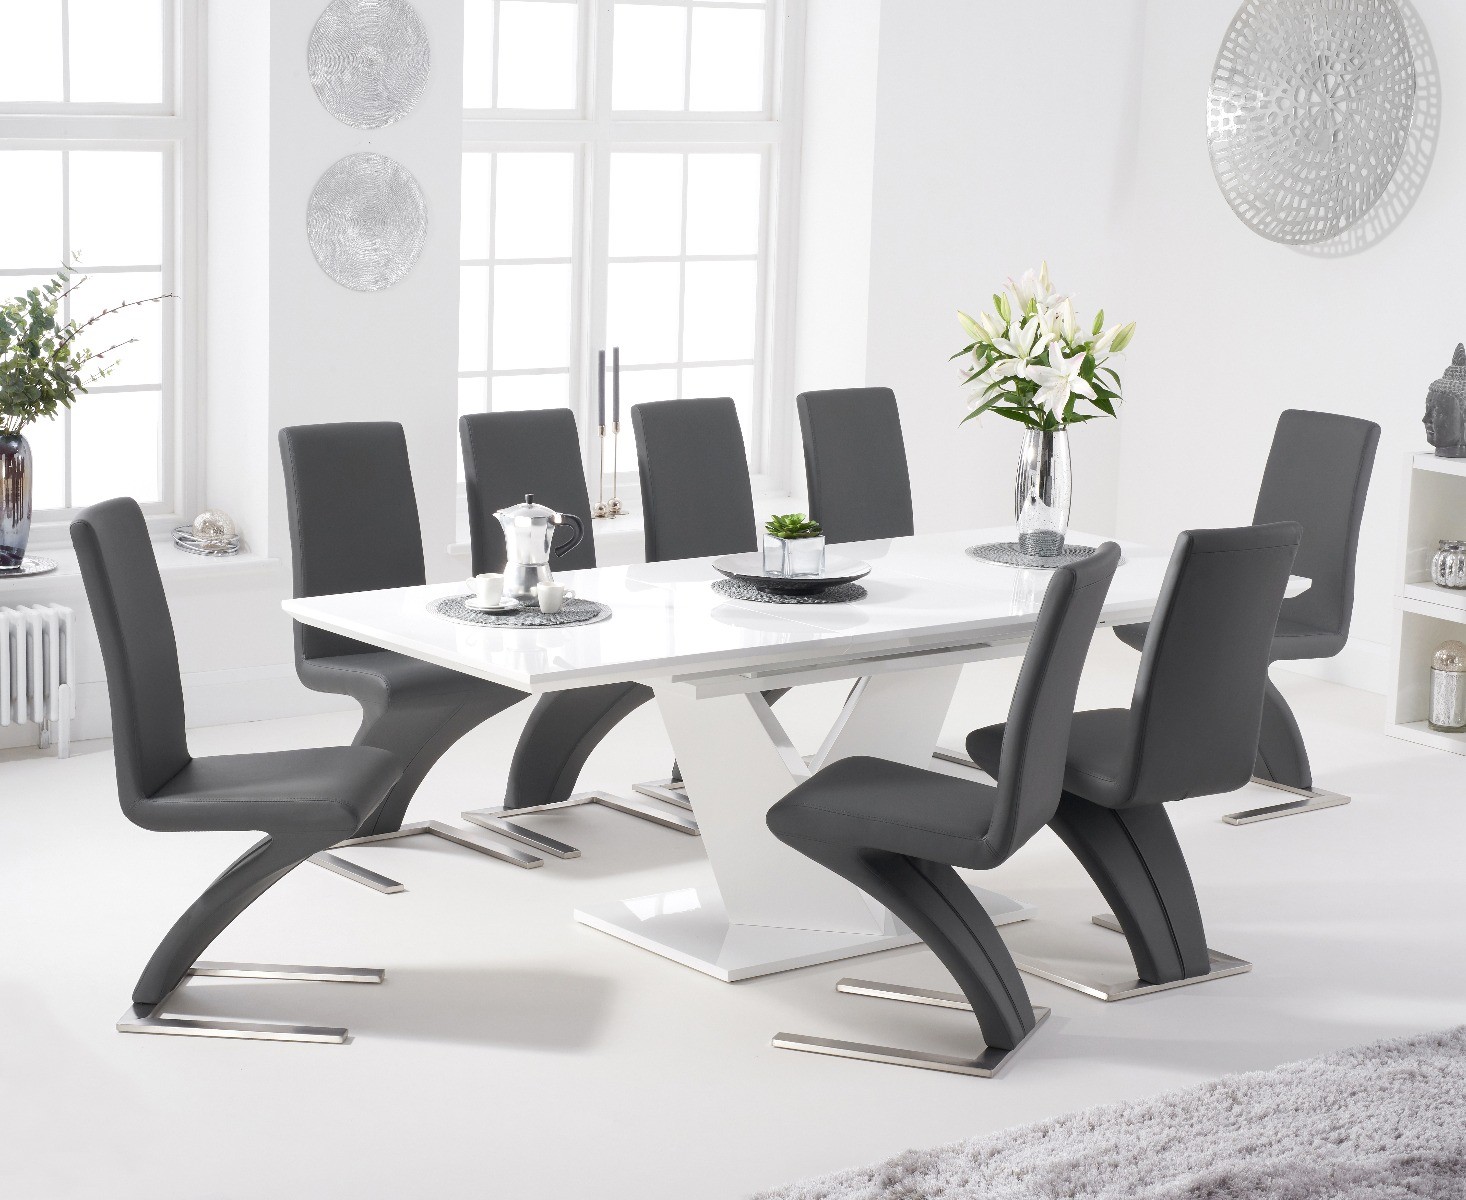 Photo 1 of Extending vittorio 160cm white high gloss dining table with 6 black aldo chairs